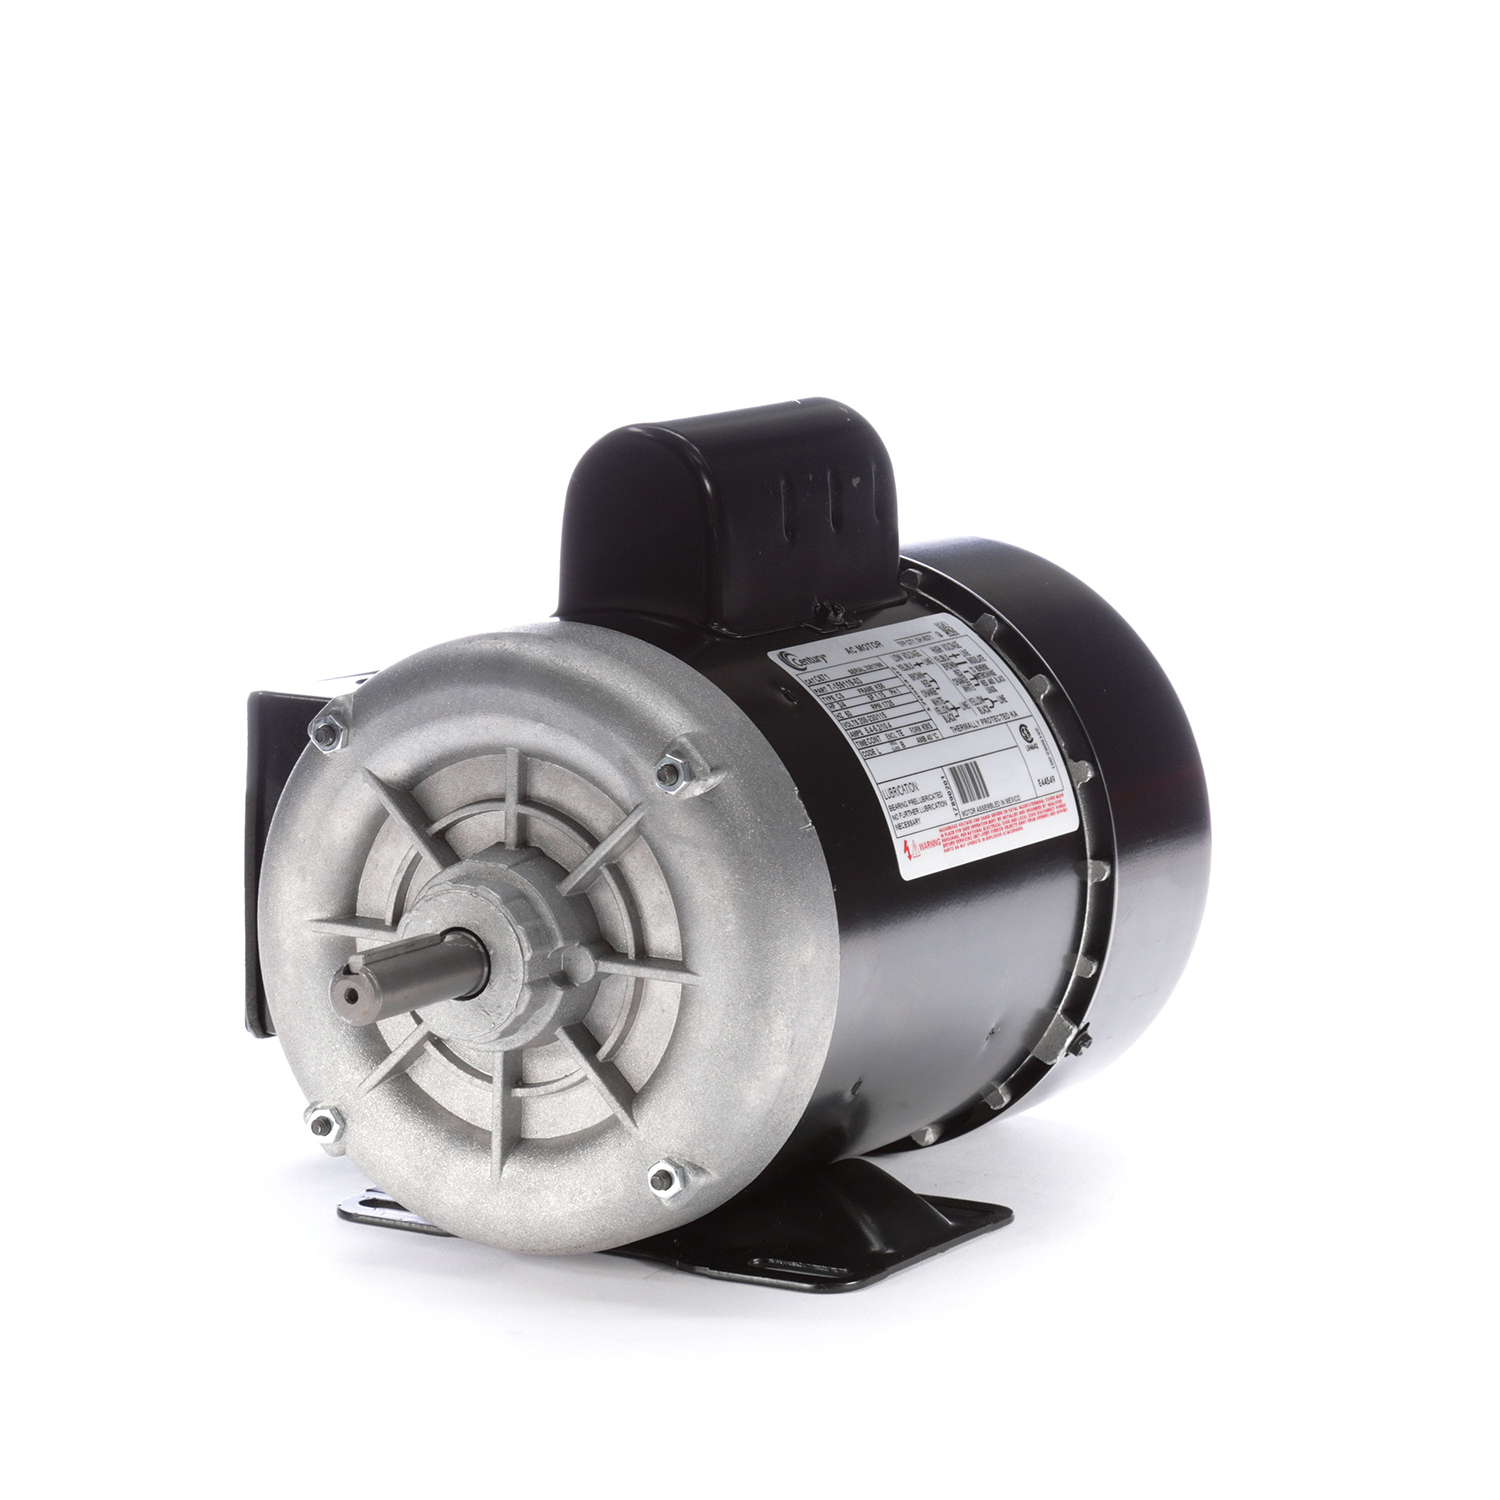 3/4 HP, 208-230/115 V, Totally Enclosed Fan Cooled (TEFC)